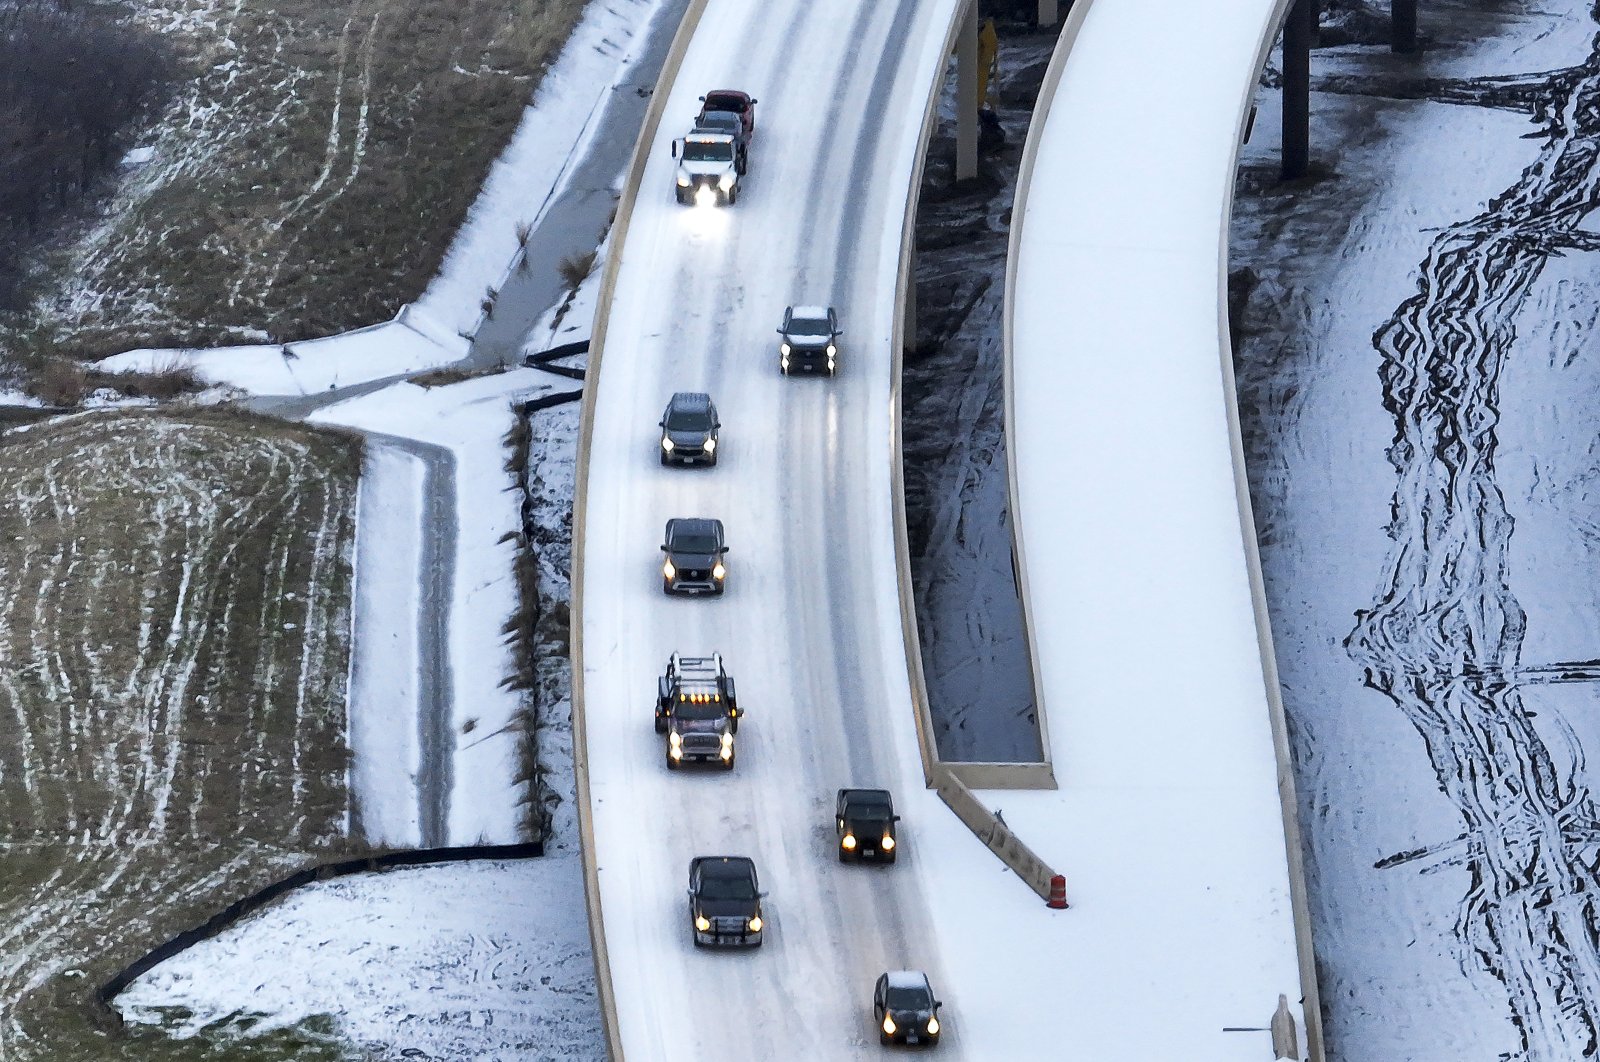 An icy mix covers Highway 114 in Roanoke, Texas. Dallas and other parts of North Texas are under a winter storm warning through Wednesday, Jan.23, 2023. (AP Photo)